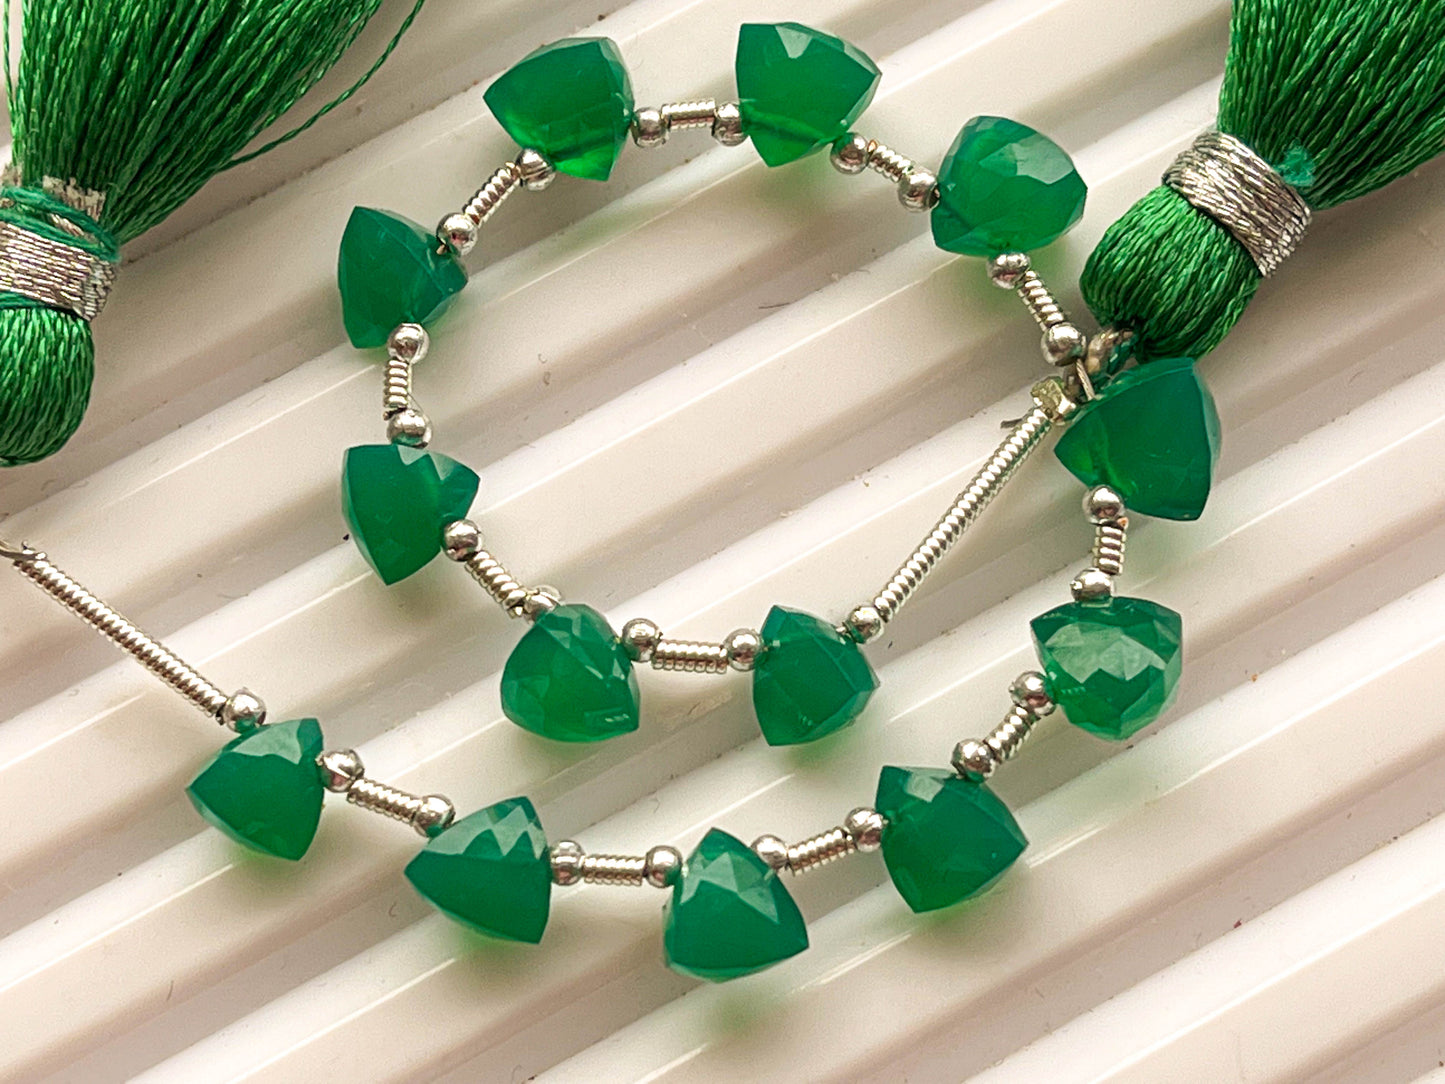 13 Pieces GREEN ONYX 3D Trillion Shape Beads Beadsforyourjewelry